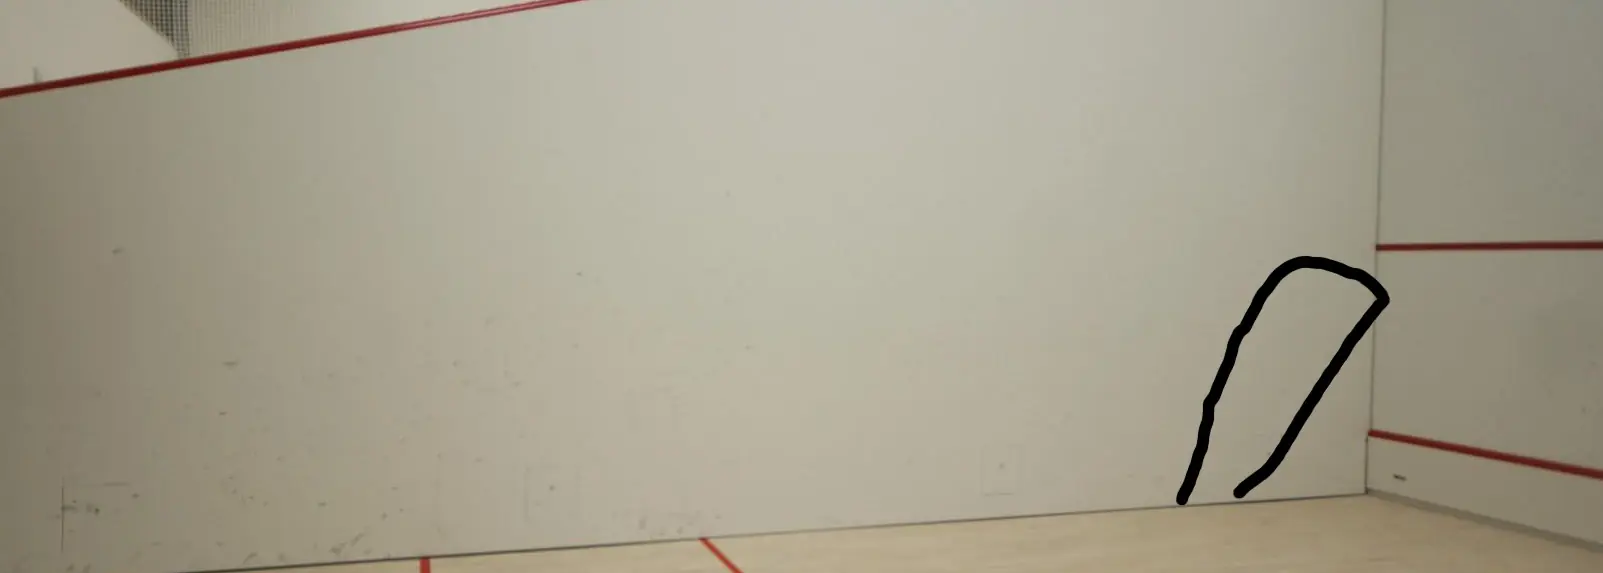 What Is The High Defensive Counter-Drop In Squash?